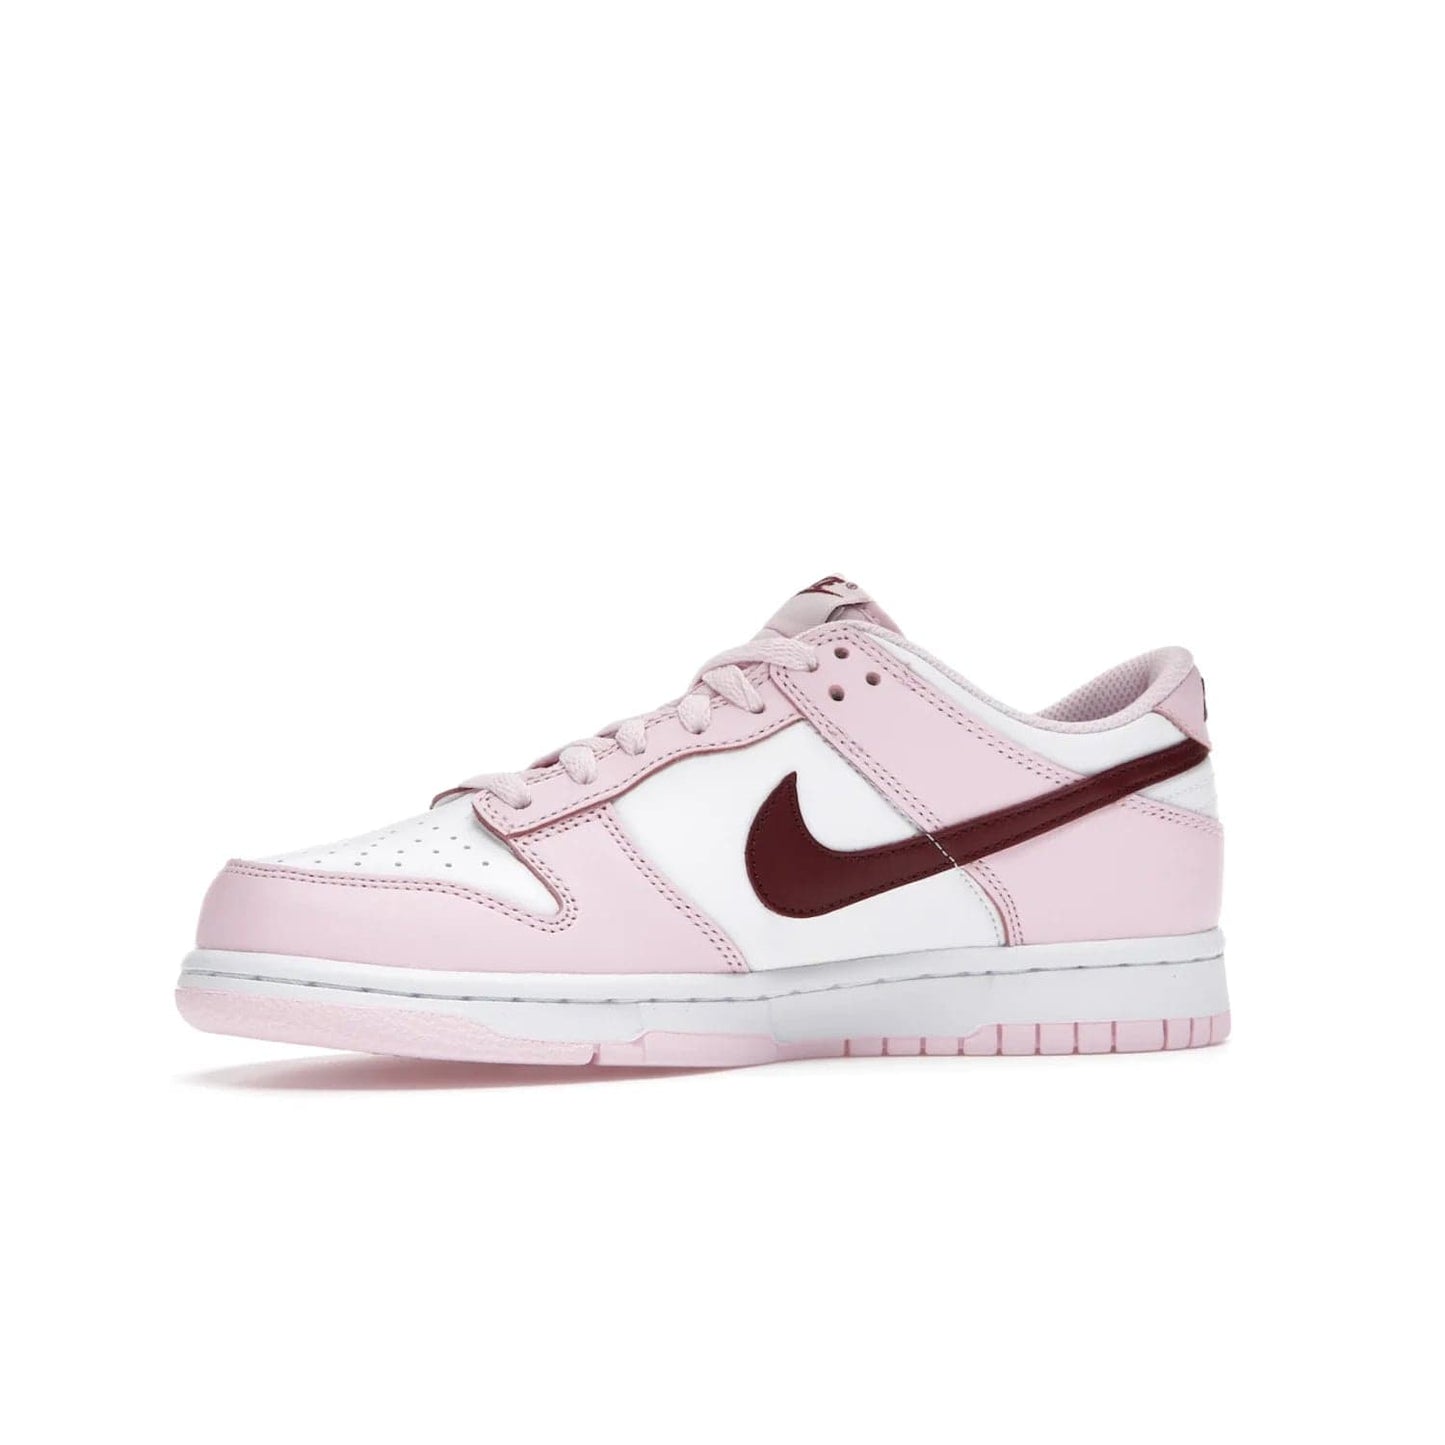 Nike Dunk Low Pink Foam Red White (GS) - Image 17 - Only at www.BallersClubKickz.com - #
Introducing the daring and stylish Nike Dunk Low Pink Foam Red White (GS) sneaker for grade schoolers. White leather with pink overlays and Dark Beetroot accents, classic Nike Dunk midsole and pink outsole. Released August 2021 for $85.